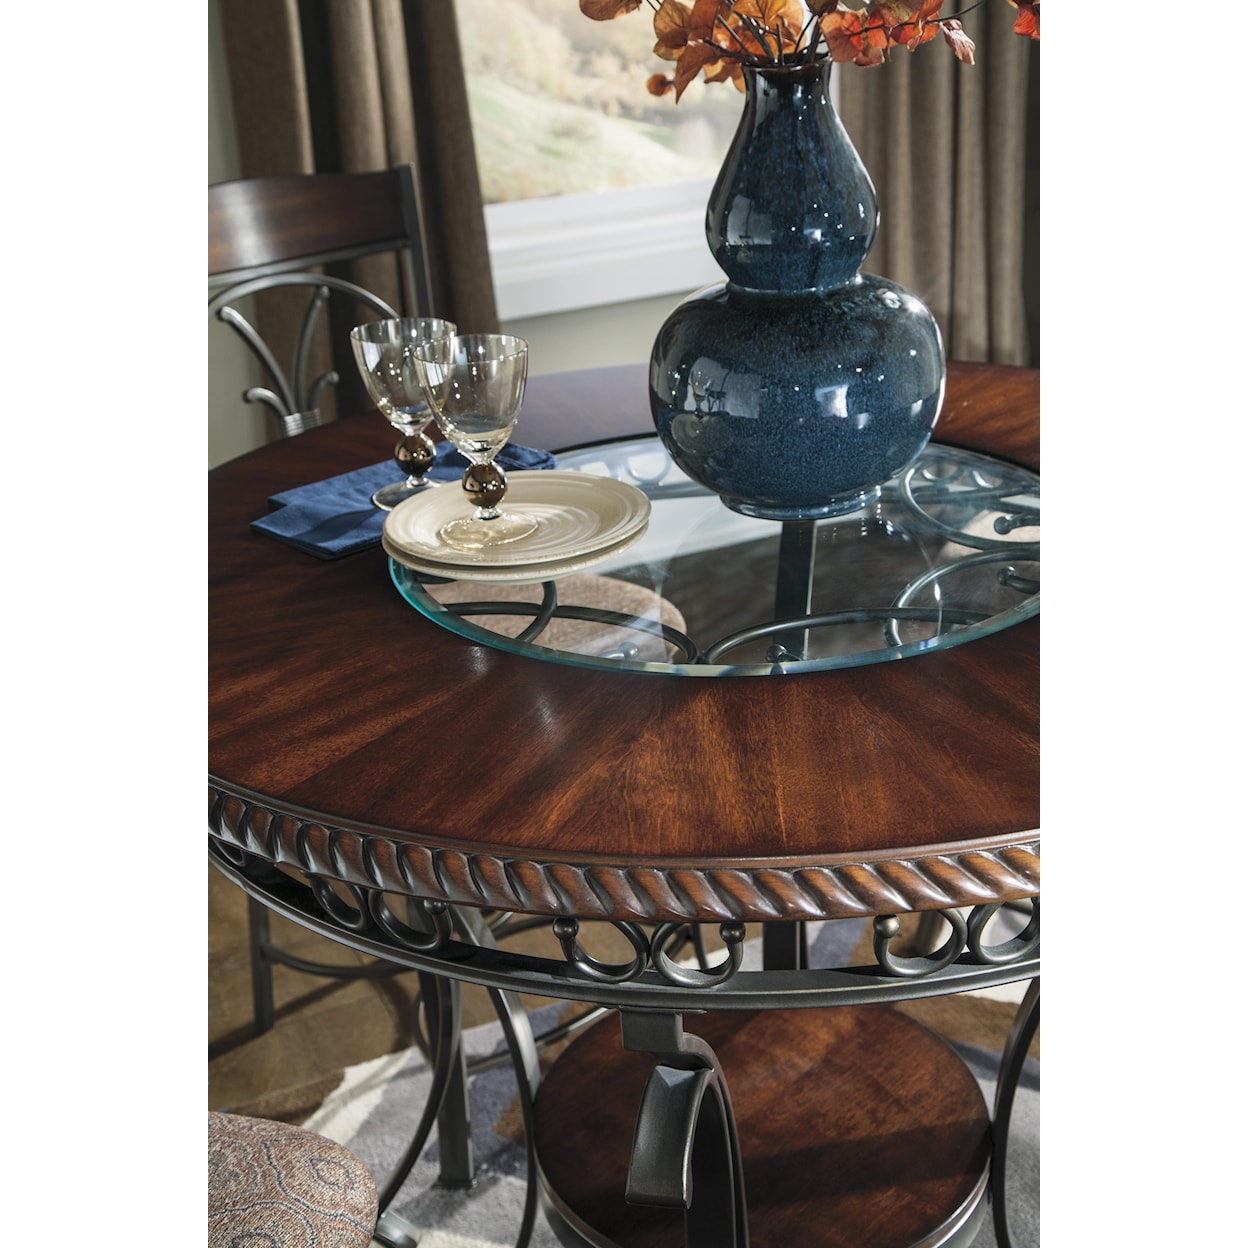 Signature Design by Ashley Glambrey Round Dining Room Counter Table